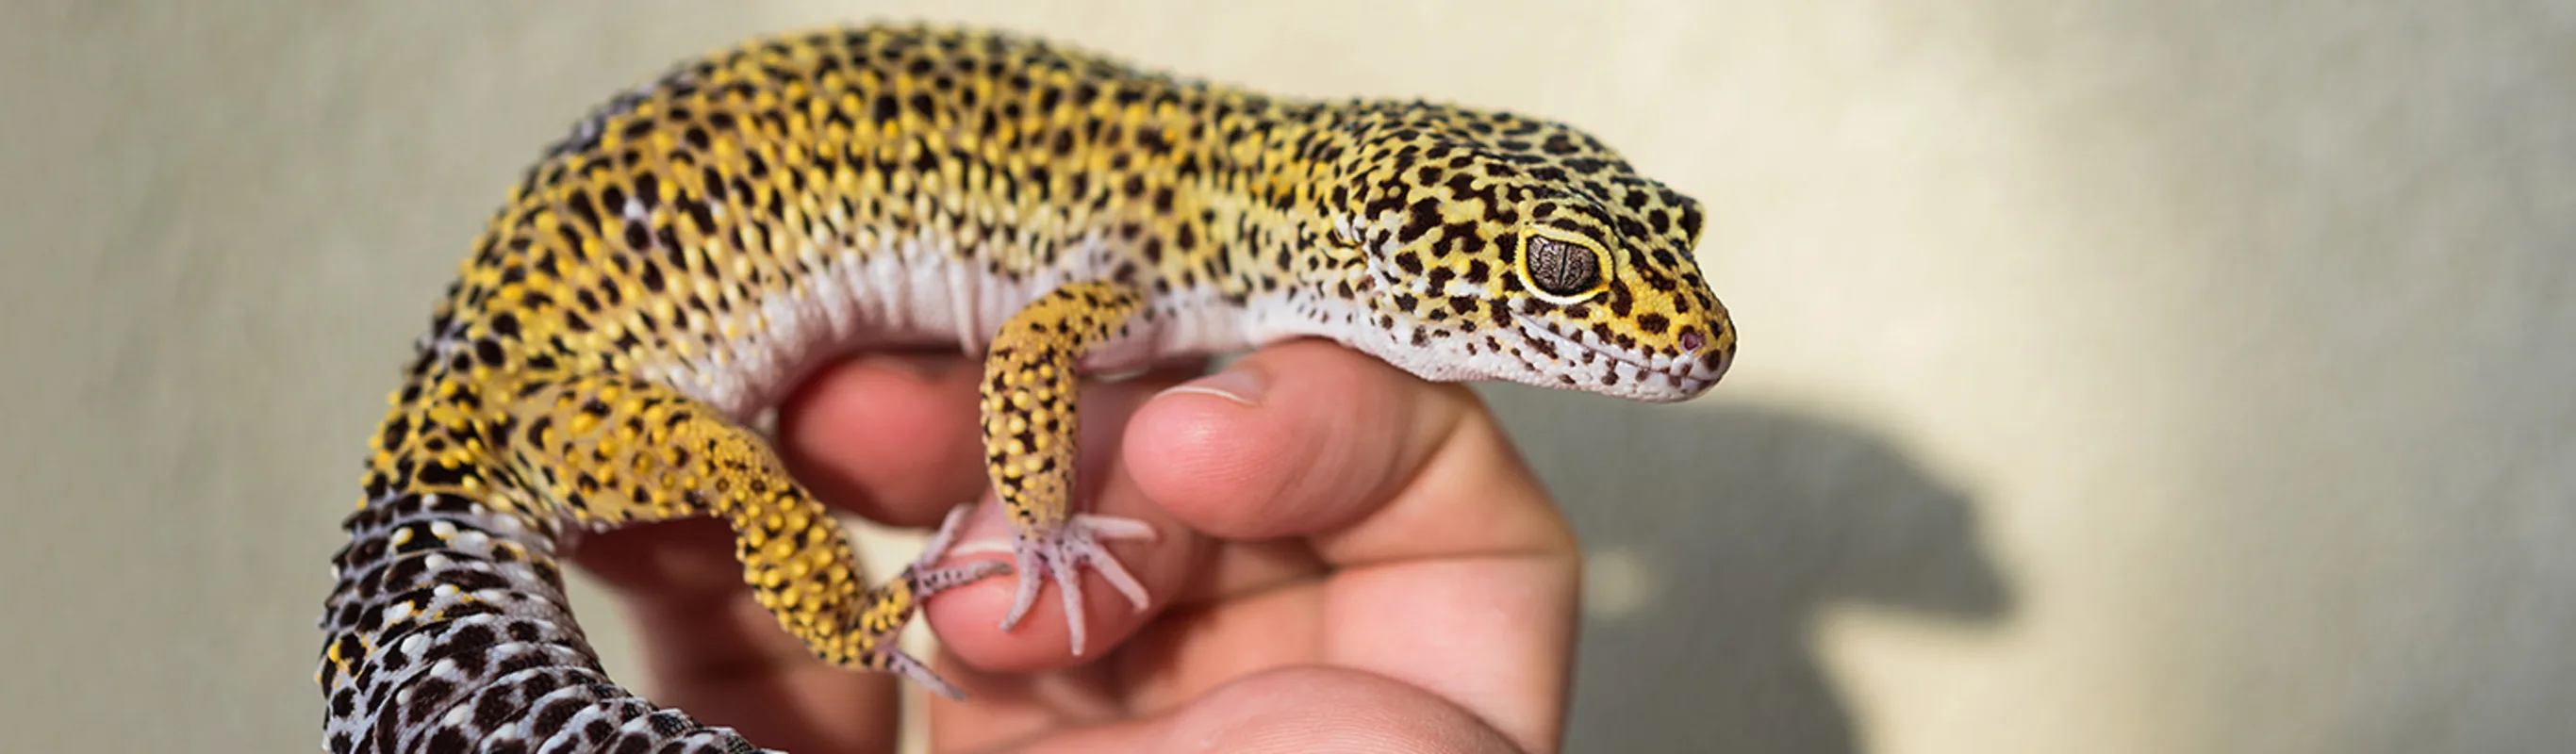 Yellow leopard gecko sitting on a hand